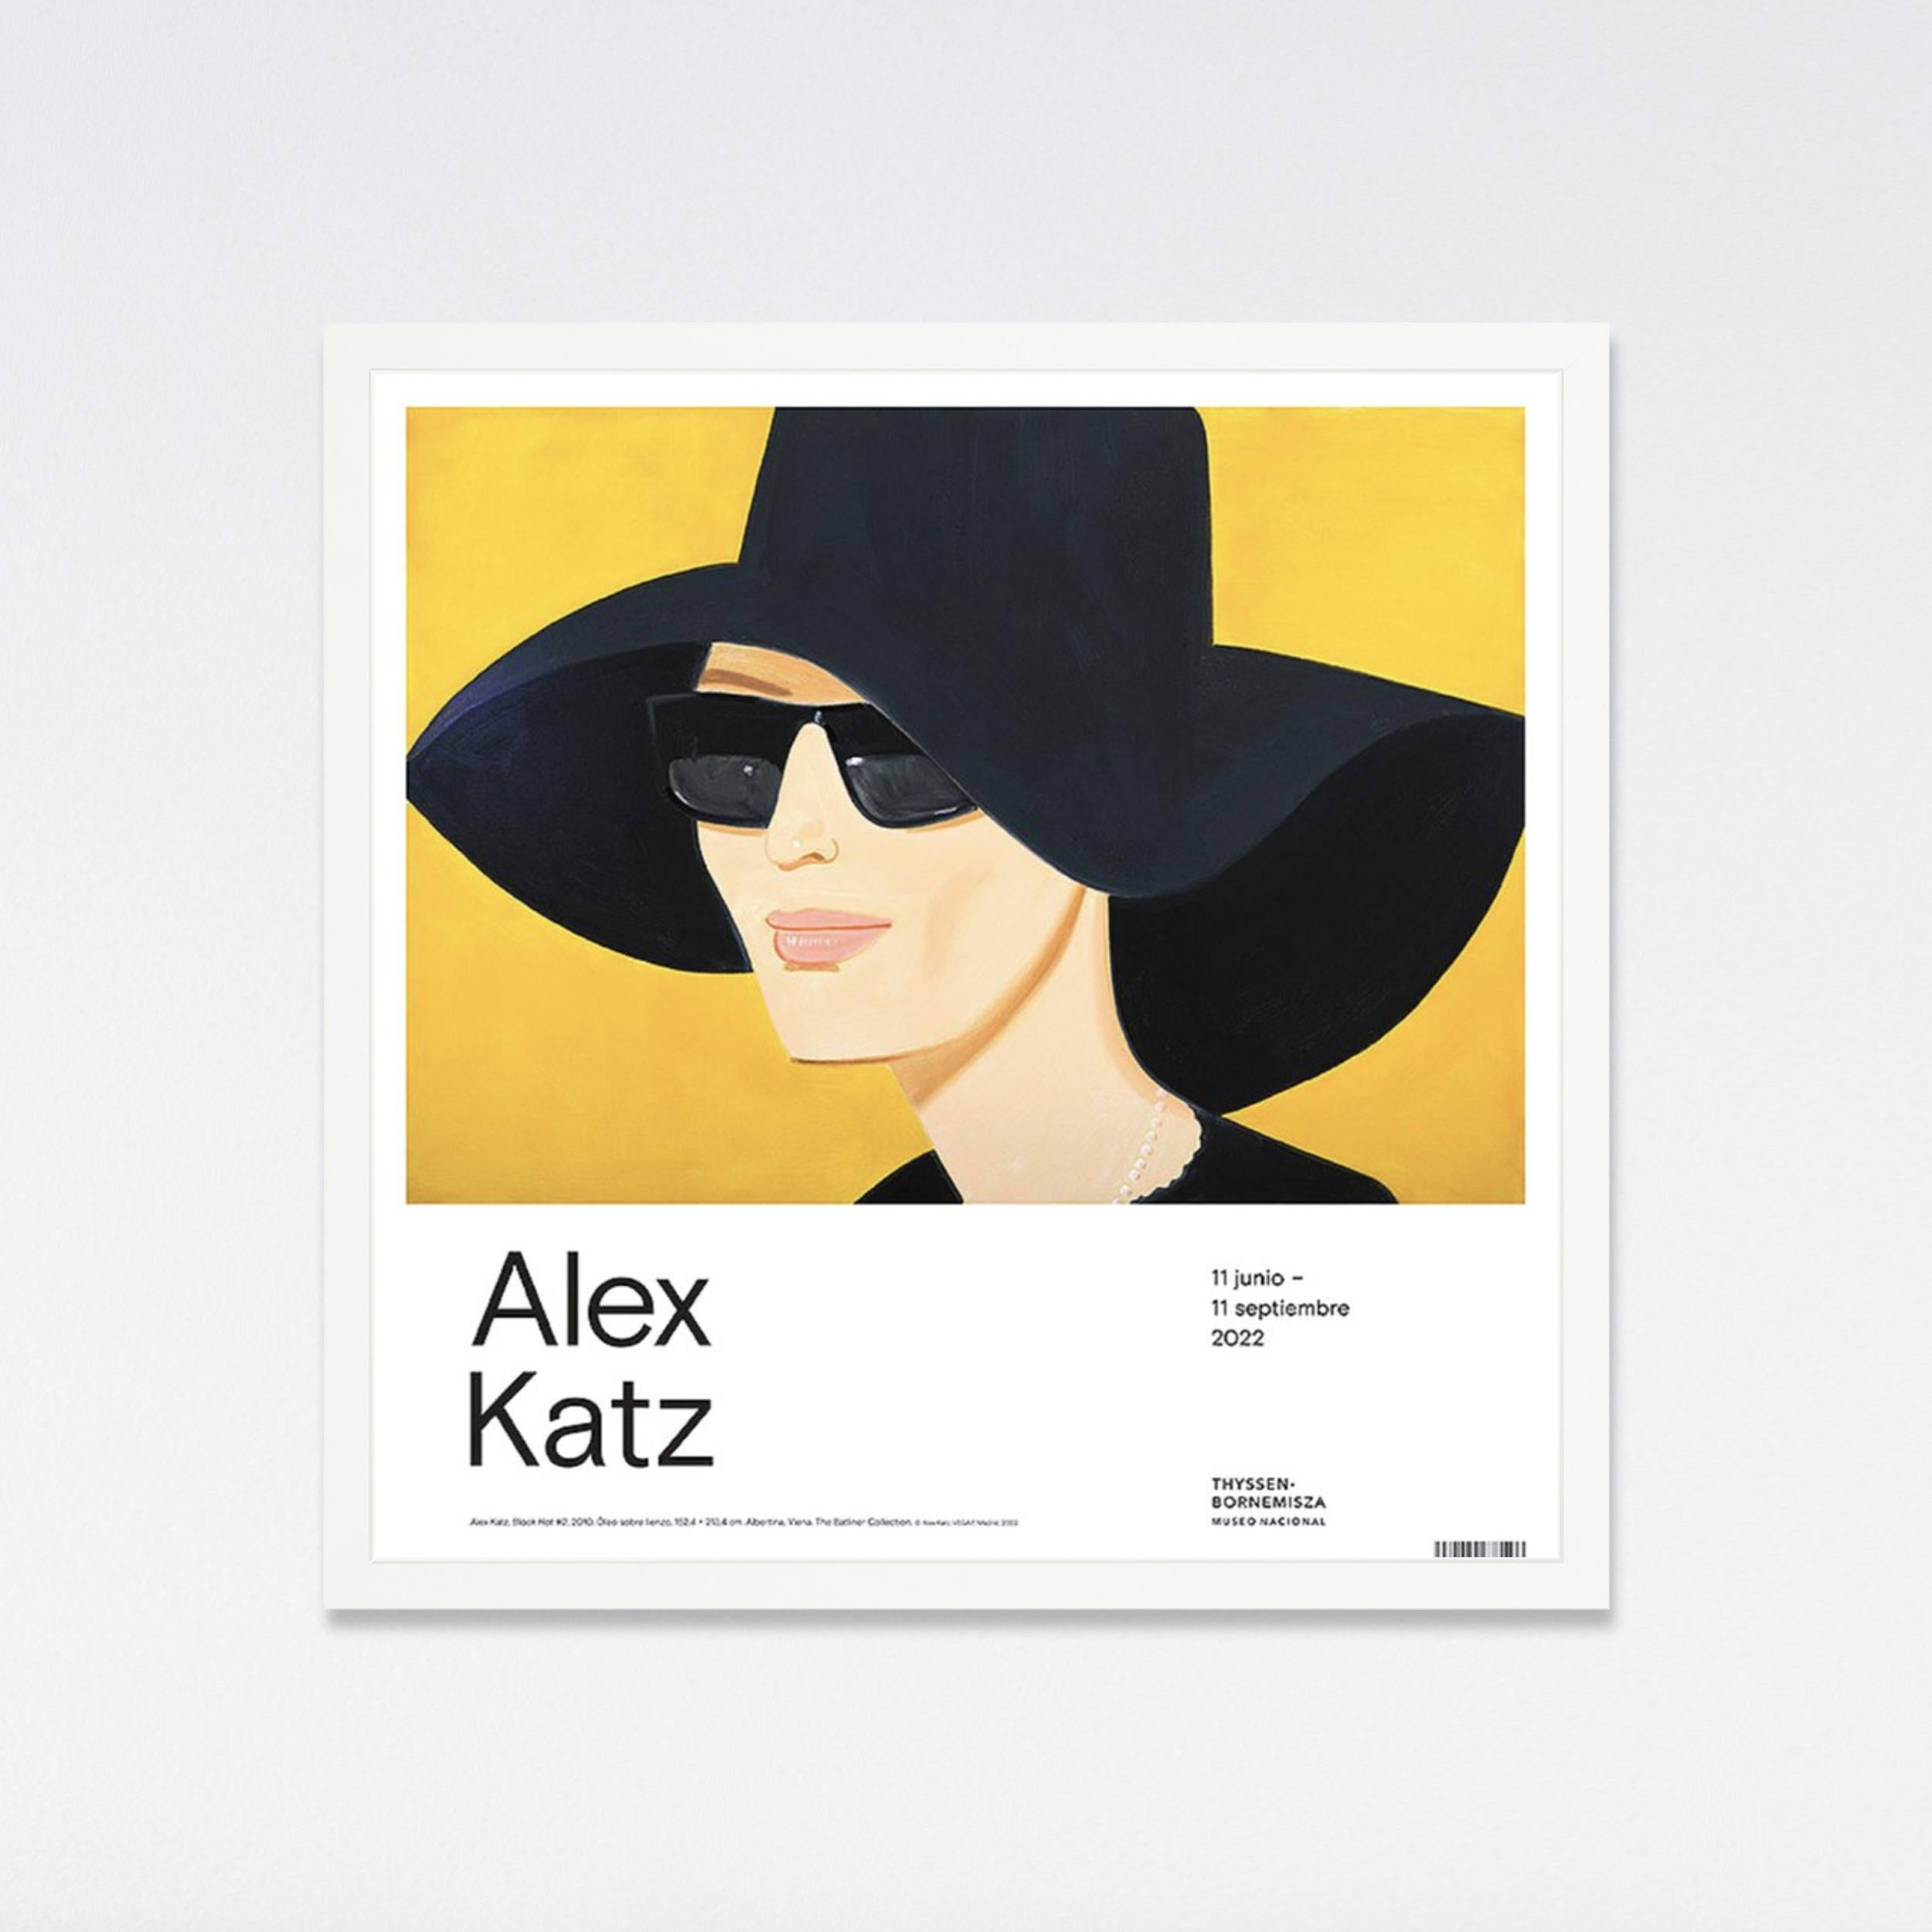 Published on the occasion of Alex Katz's exhibition Thyssen-Bornemisza Museum in Madrid. This poster features the work Black Hat #2 (2010).

19.68 x 19.68 in
50 x 50 cm